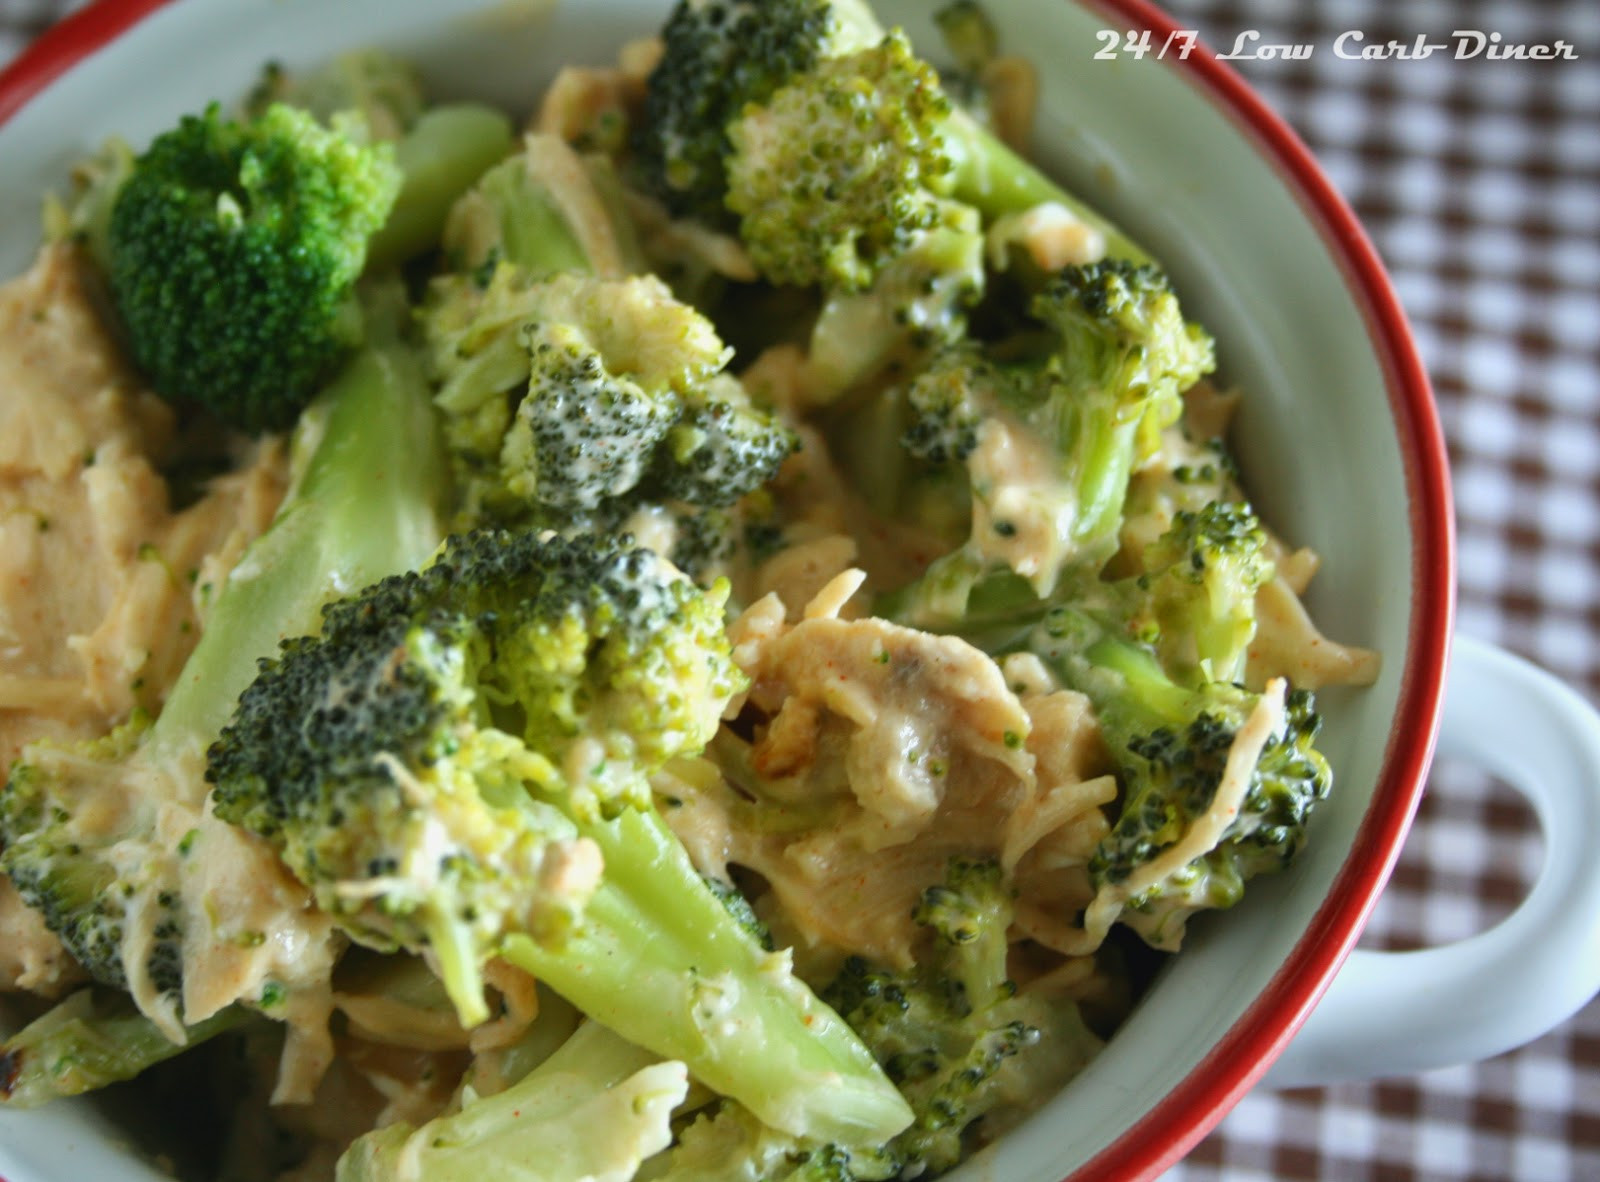 Broccoli And Chicken Casserole
 24 7 Low Carb Diner Chicken and Broccoli Casserole for 2